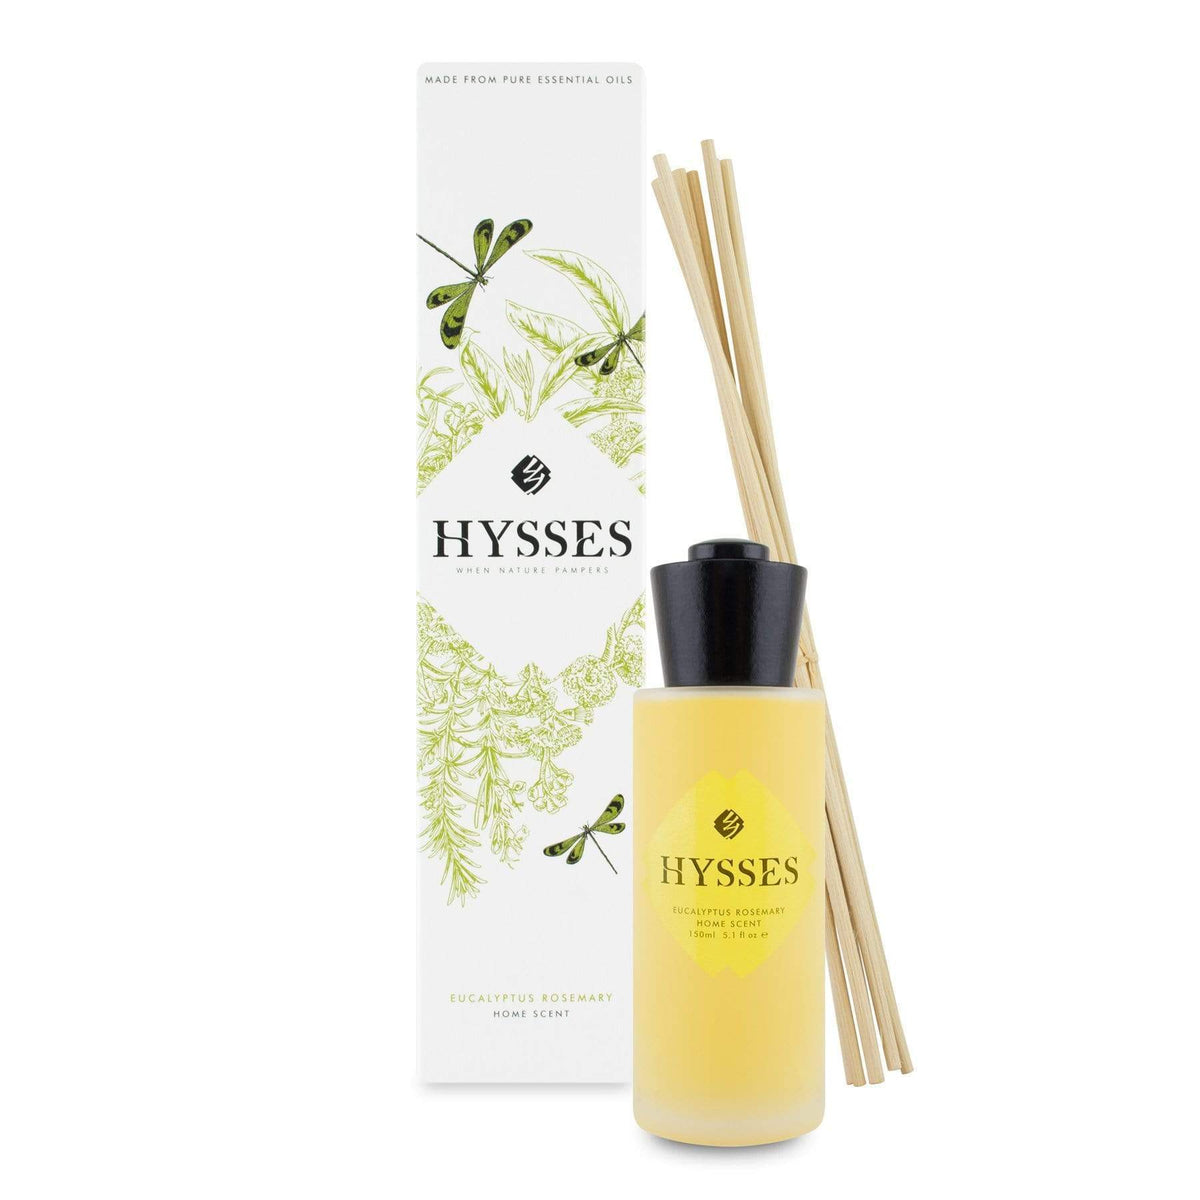 Hysses Home Scents 150ml Home Scent Reed Diffuser Eucalyptus Rosemary